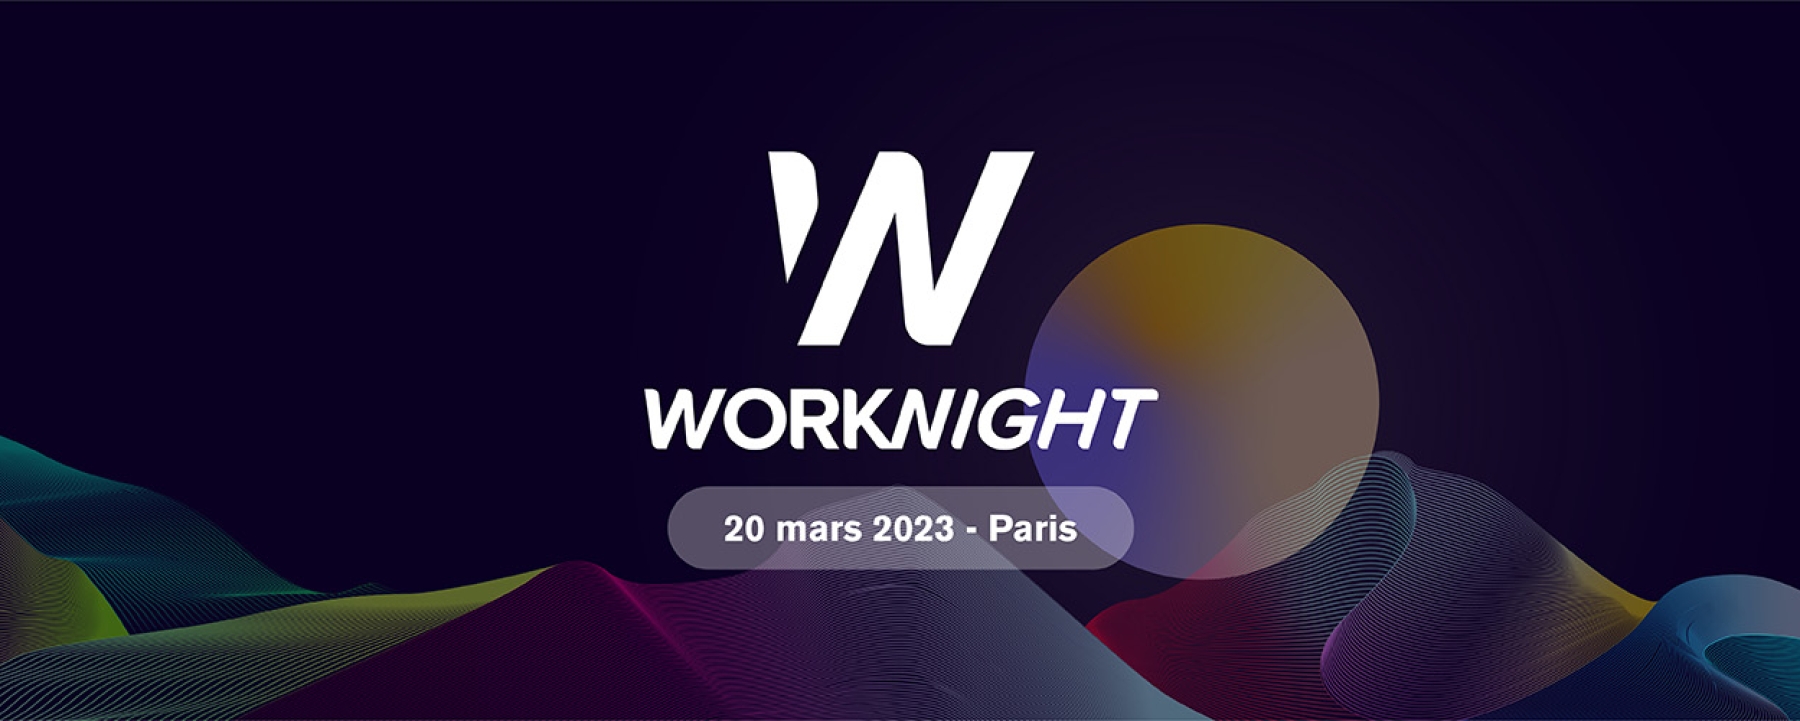 Worknight - 2e édition 